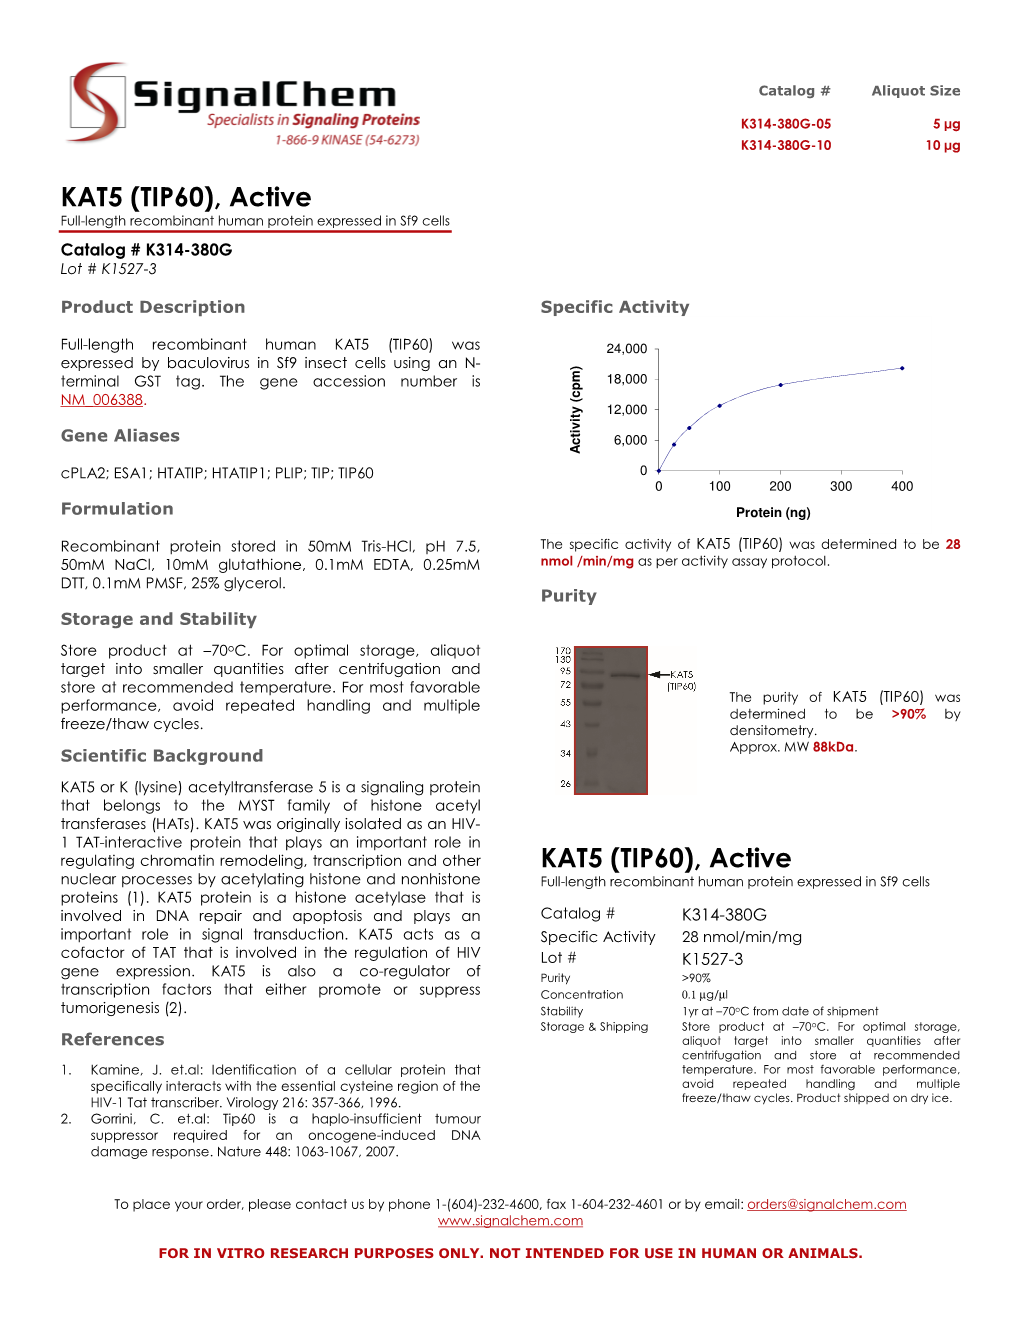 KAT5 (TIP60), Active Full-Length Recombinant Human Protein Expressed in Sf9 Cells